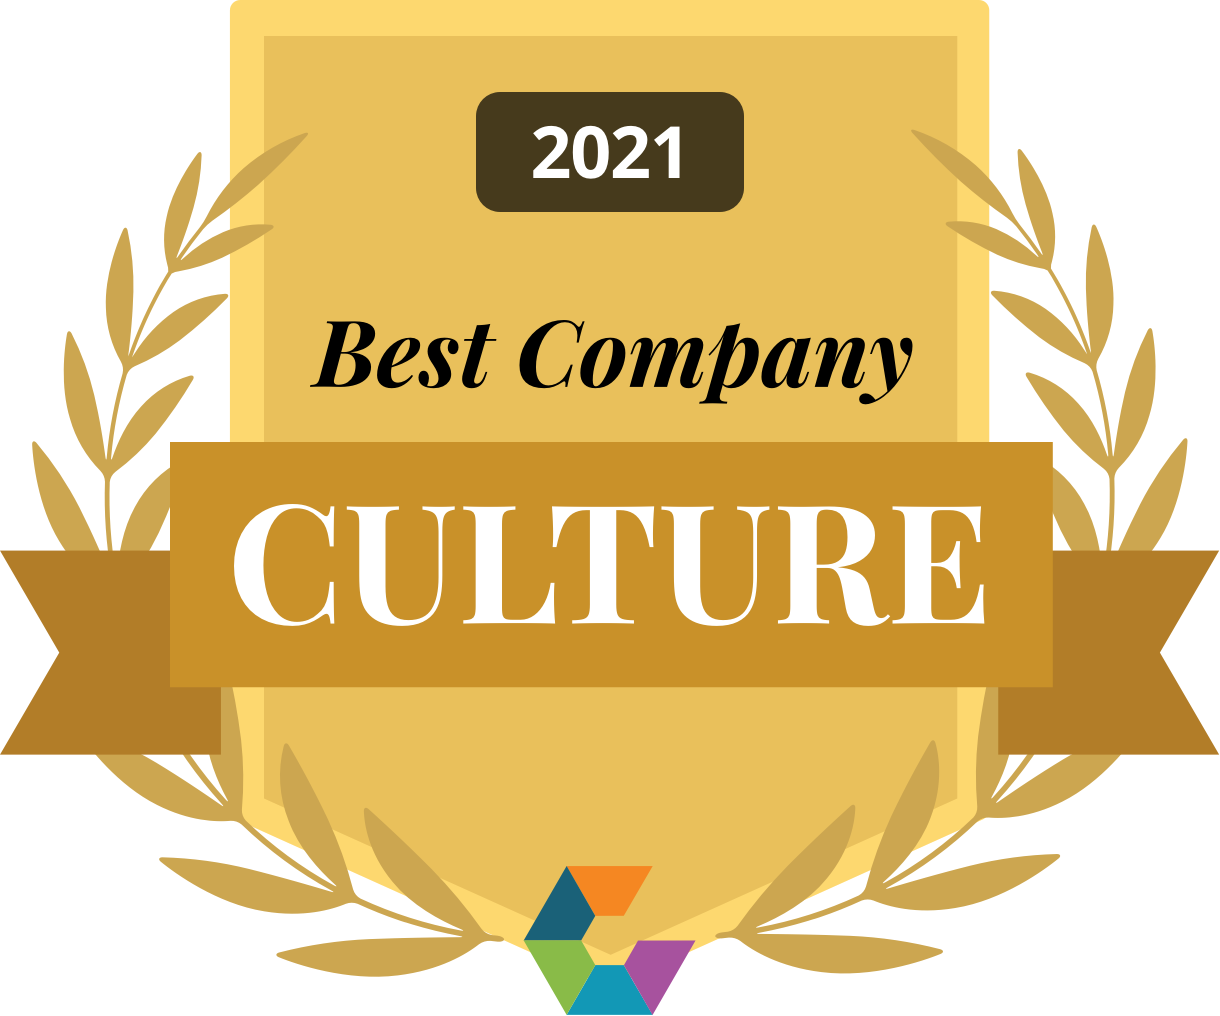 comparably best company culture award